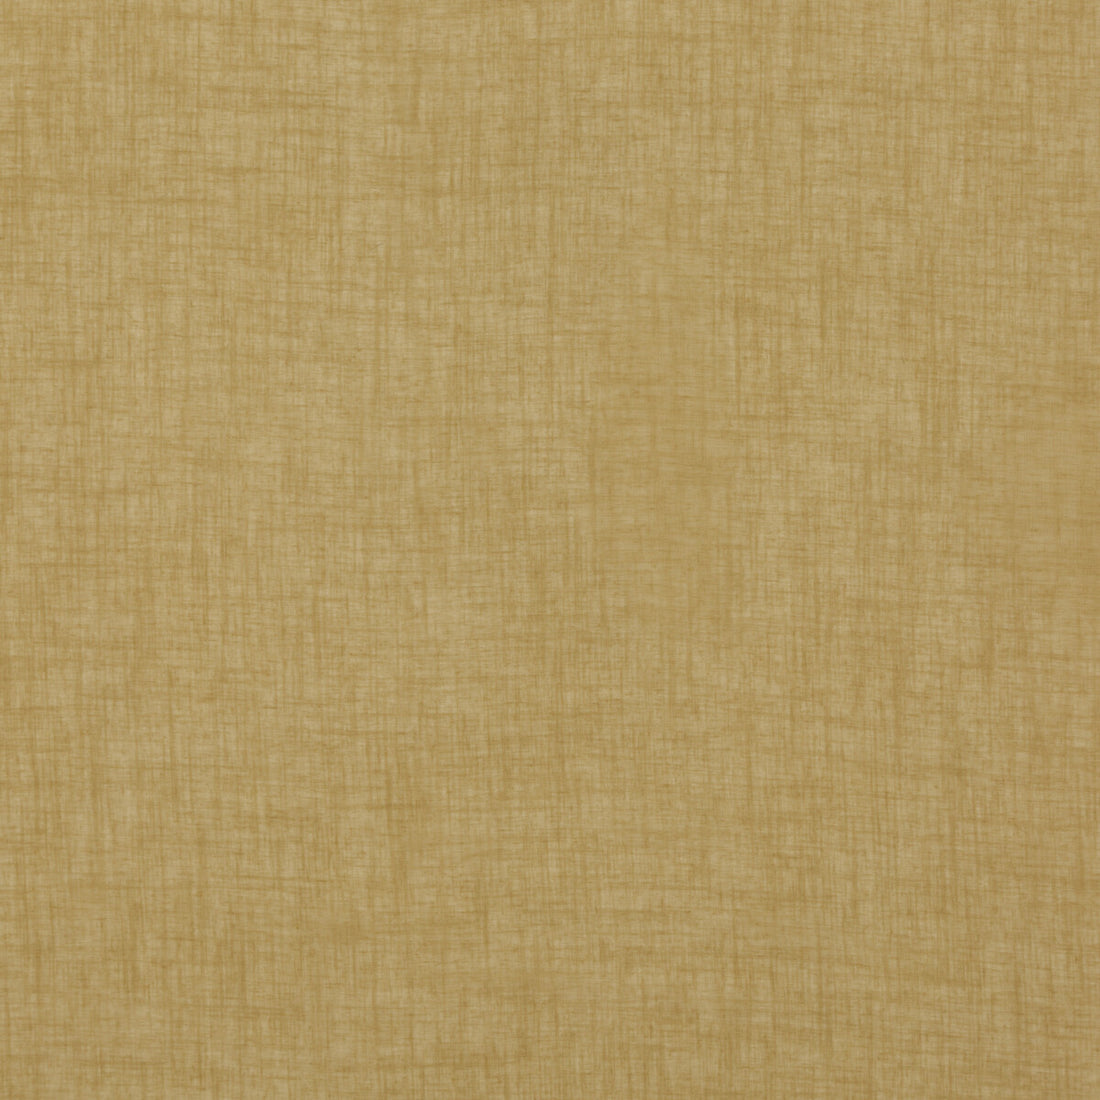 Kelso fabric in ochre color - pattern PV1005.840.0 - by Baker Lifestyle in the Notebooks collection